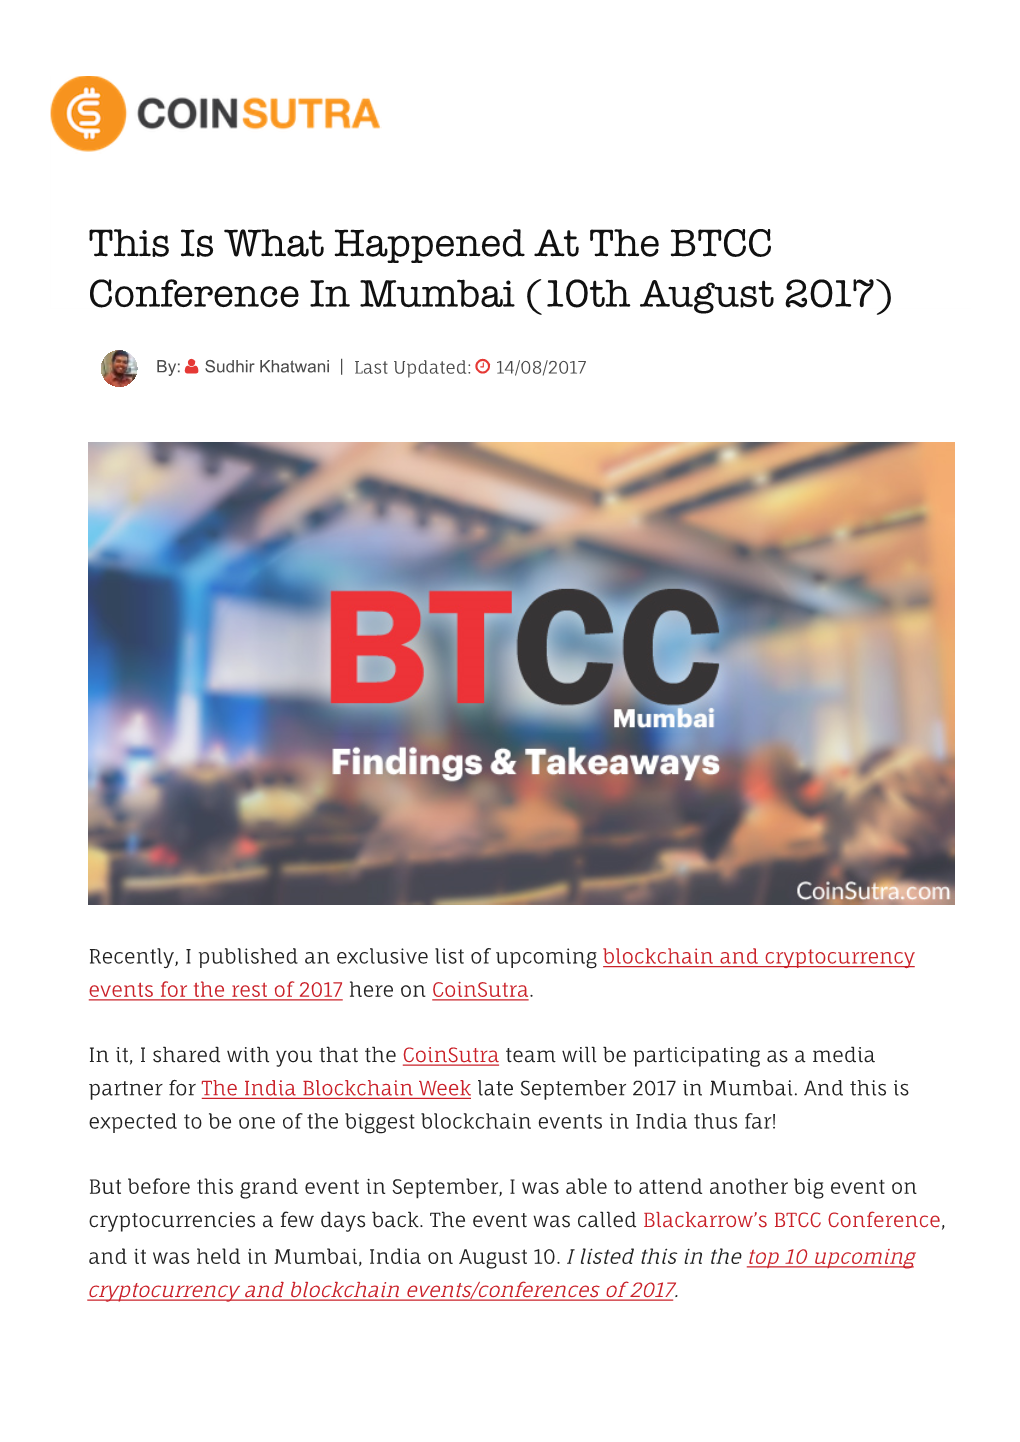 This Is What Happened at the BTCC Conference in Mumbai (10Th August 2017)